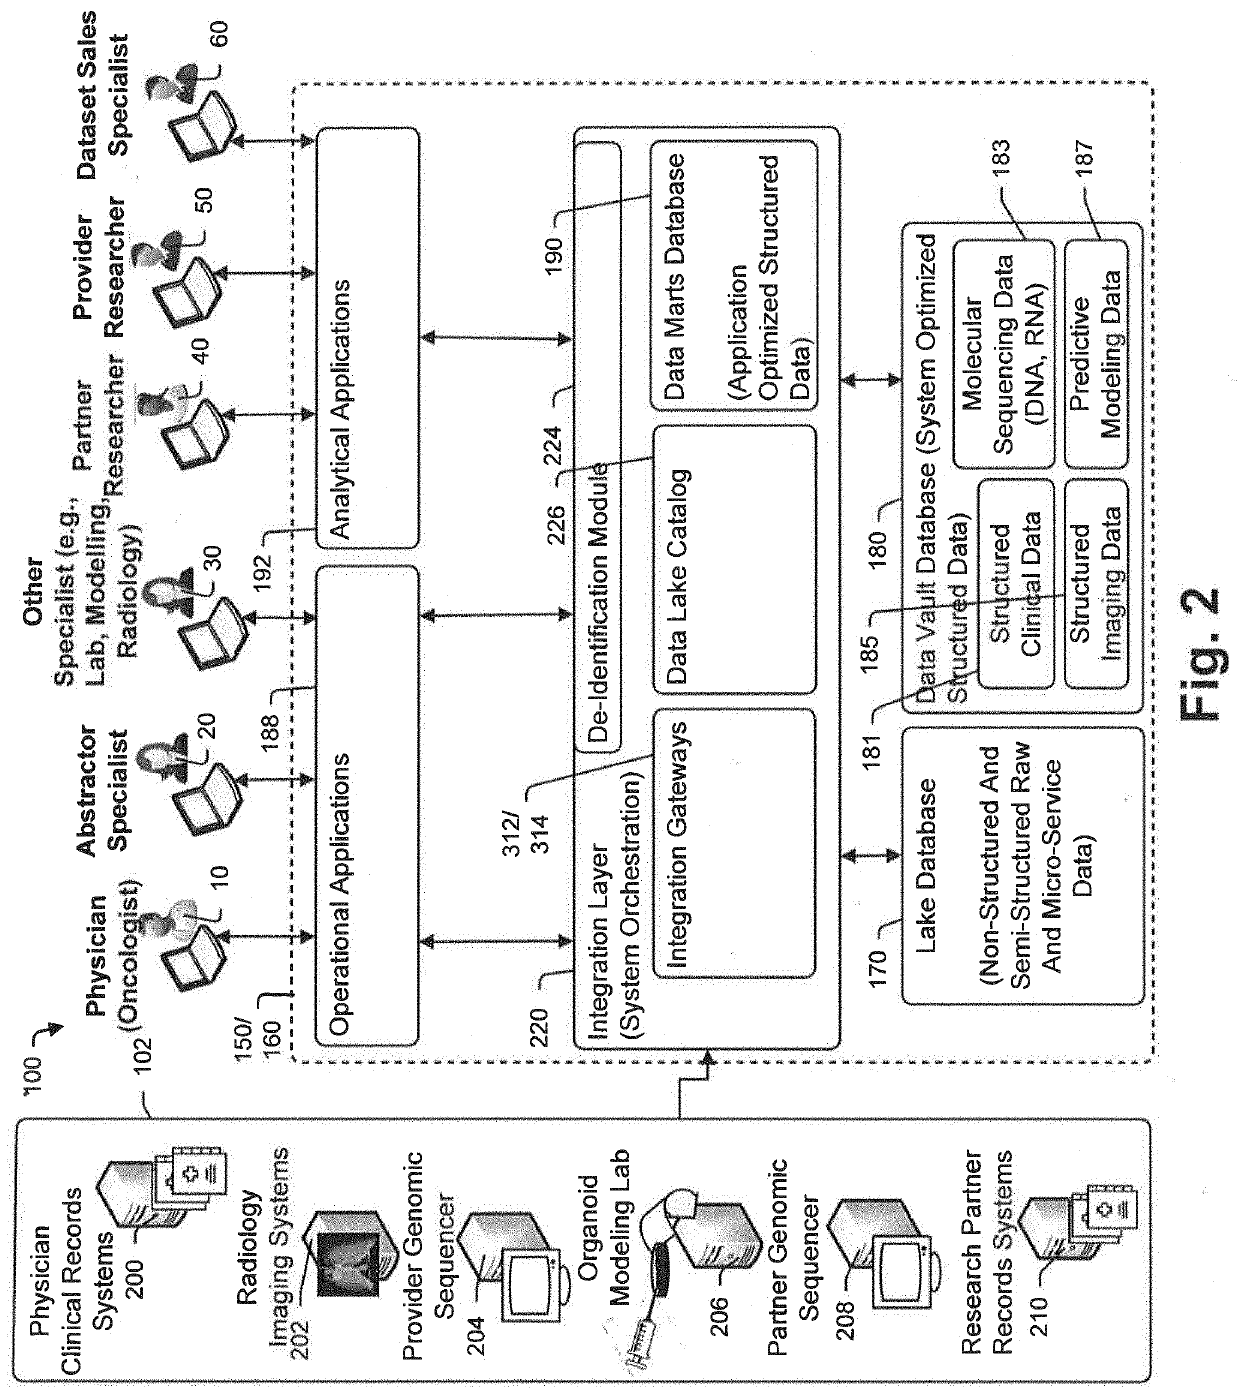 Targeted-panel tumor mutational burden calculation systems and methods